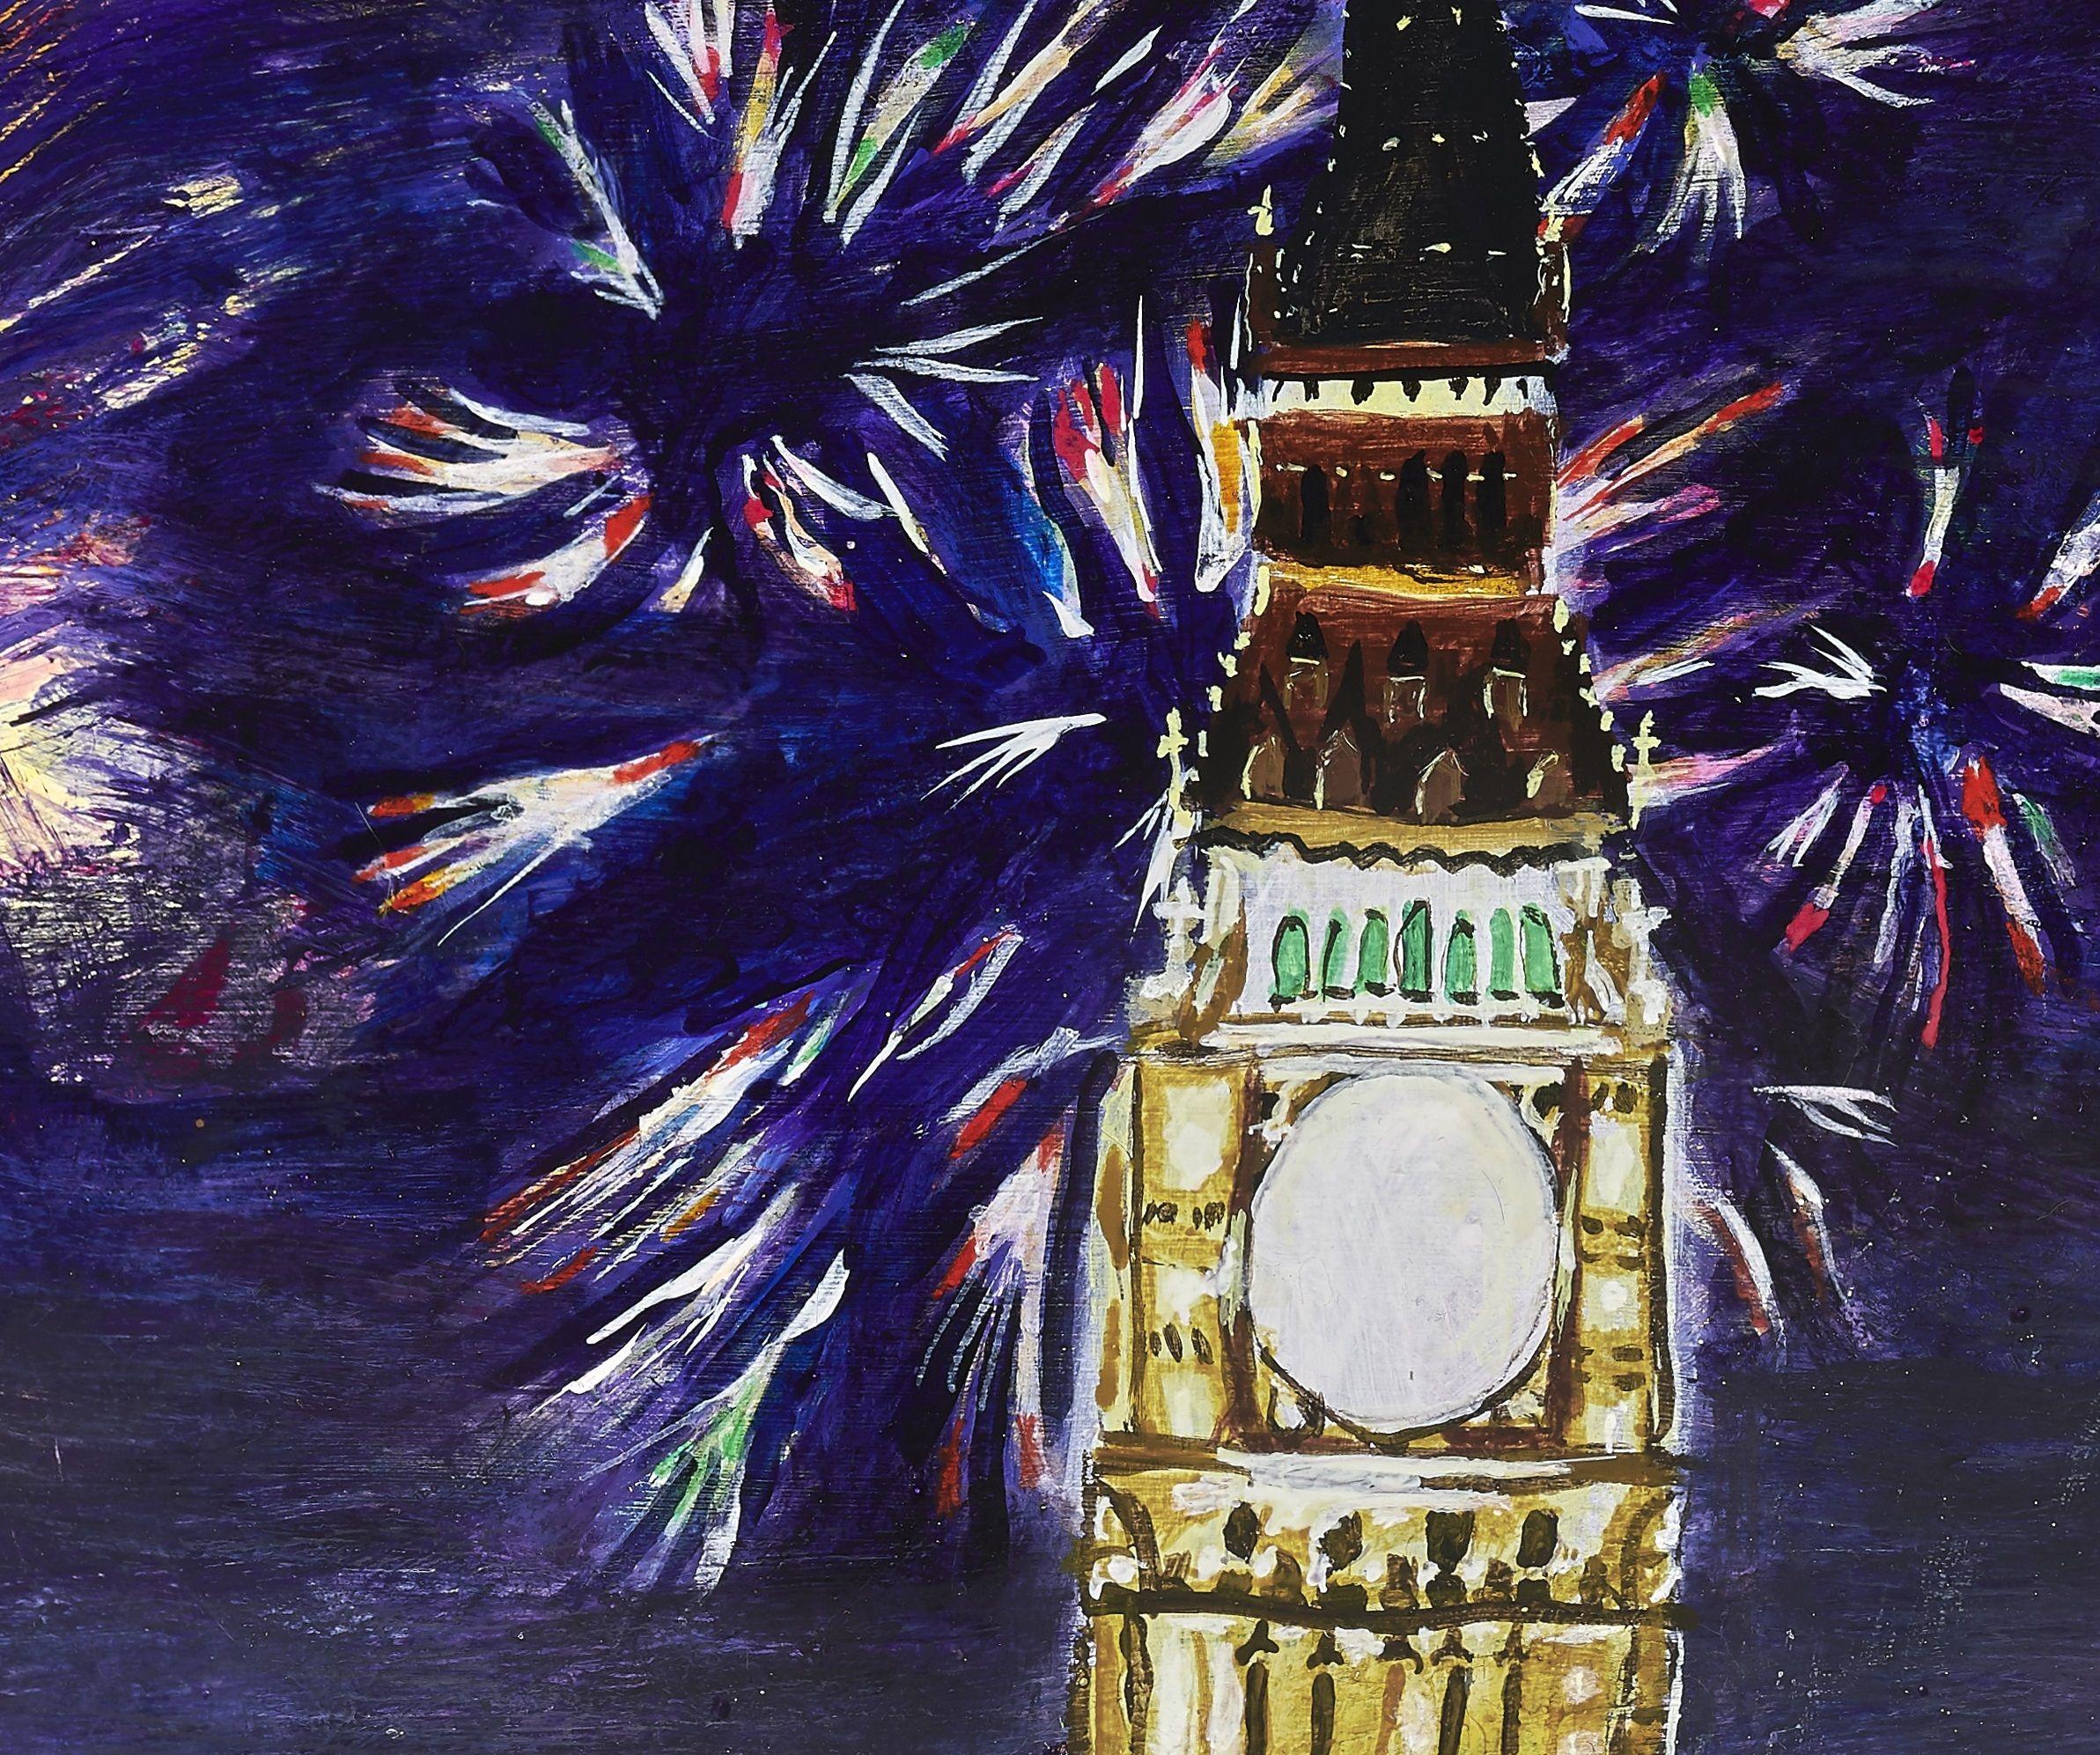   This is a nocturnal landscape painting of a firework display over the Houses of Parliament, Westminister, London, England, in which through exaggerated use of colours, especially lots of sumptious violets, purples, phthalo blue and contrasting